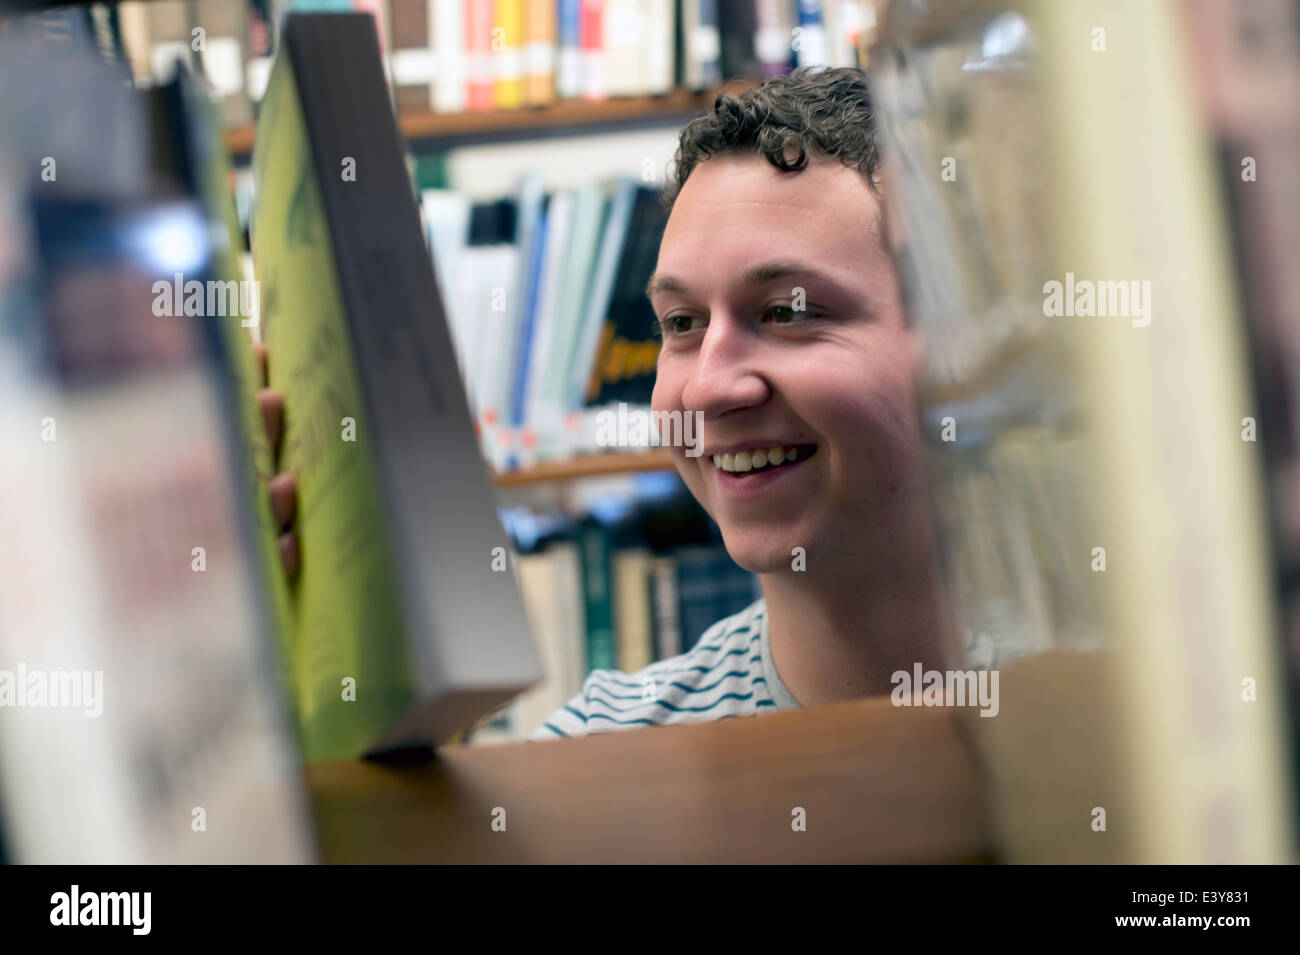 Young man choosing book in library Stock Photo